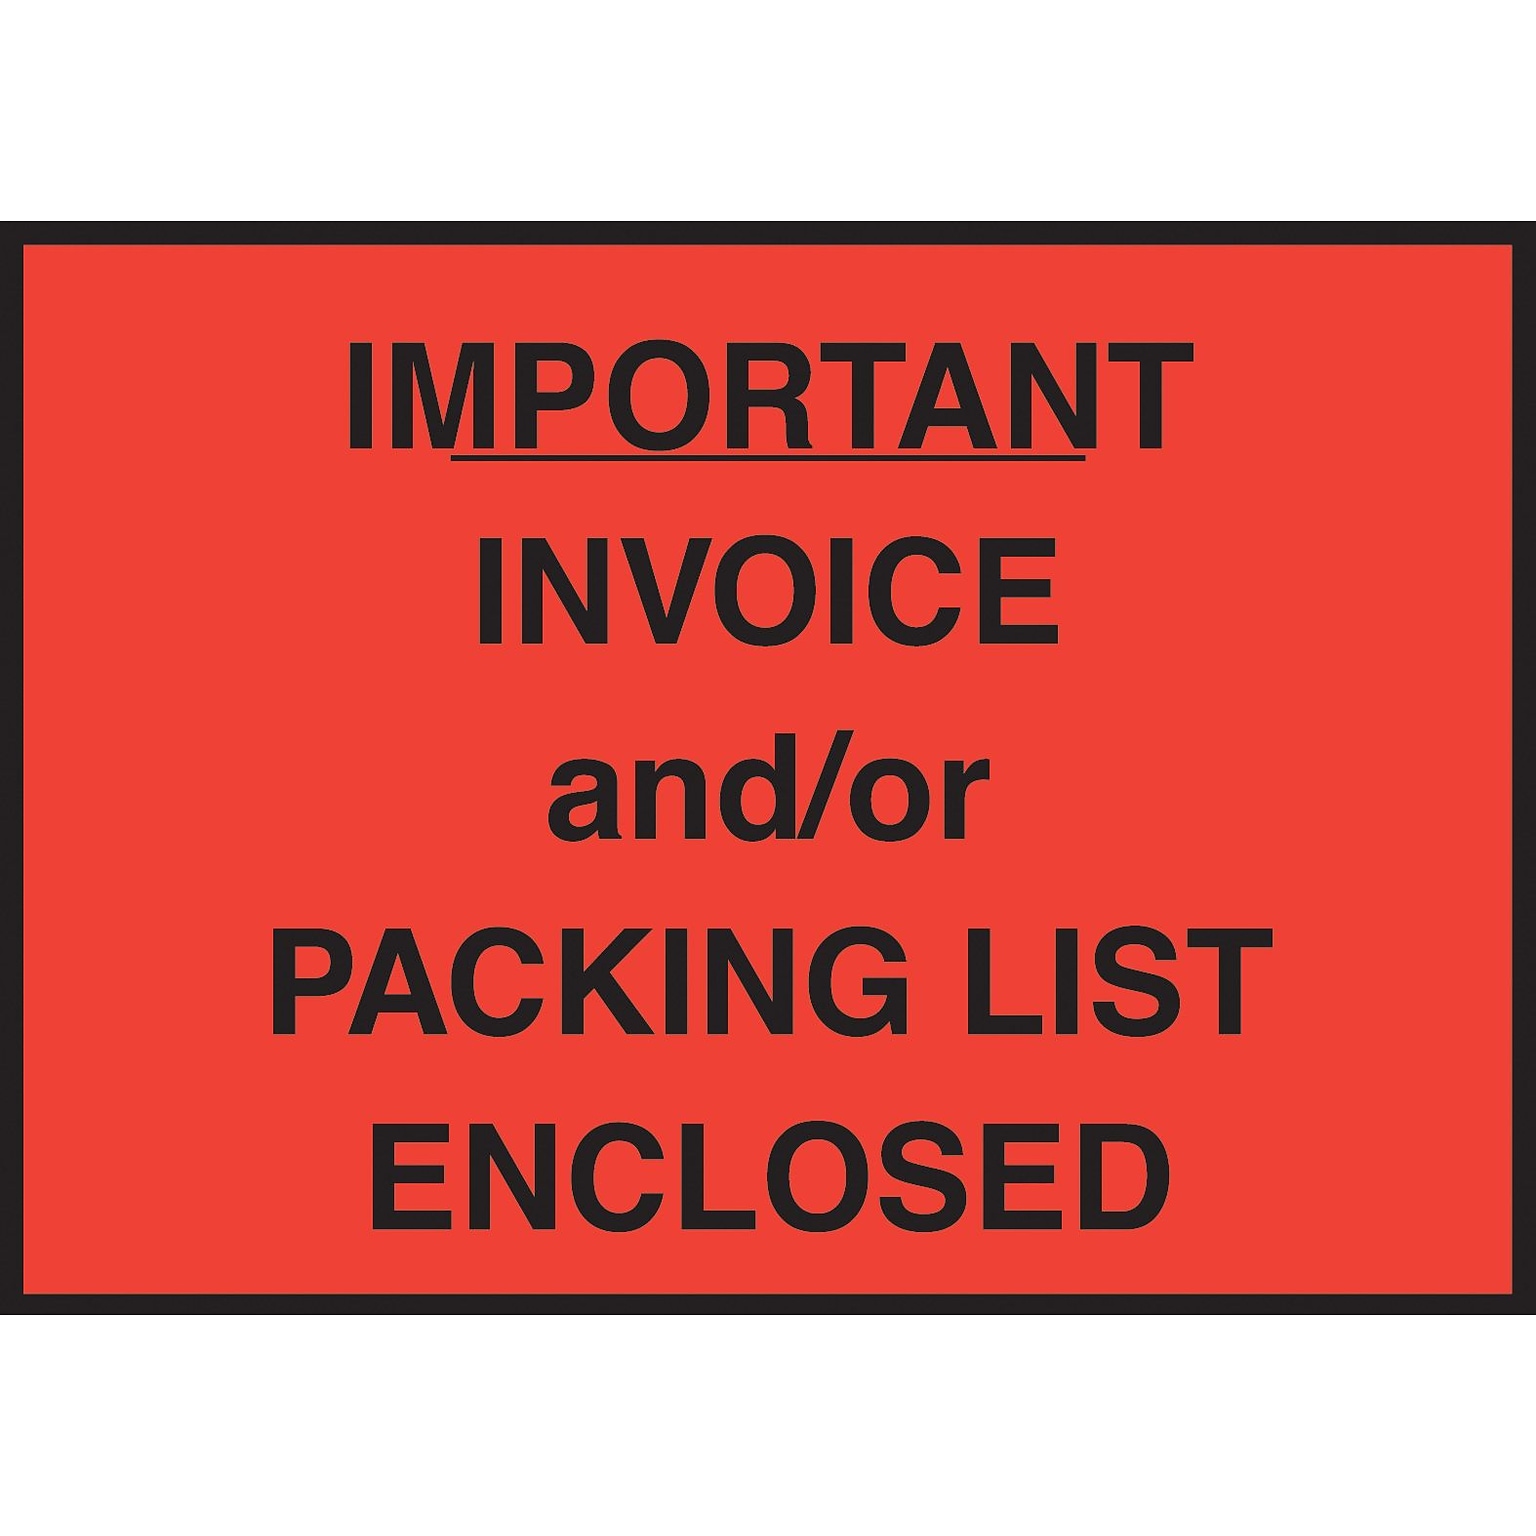 Packing List Envelope, 4-1/2 x 6, Red Full Face Important Invoice/Packing List Enclosed, 1000/Case